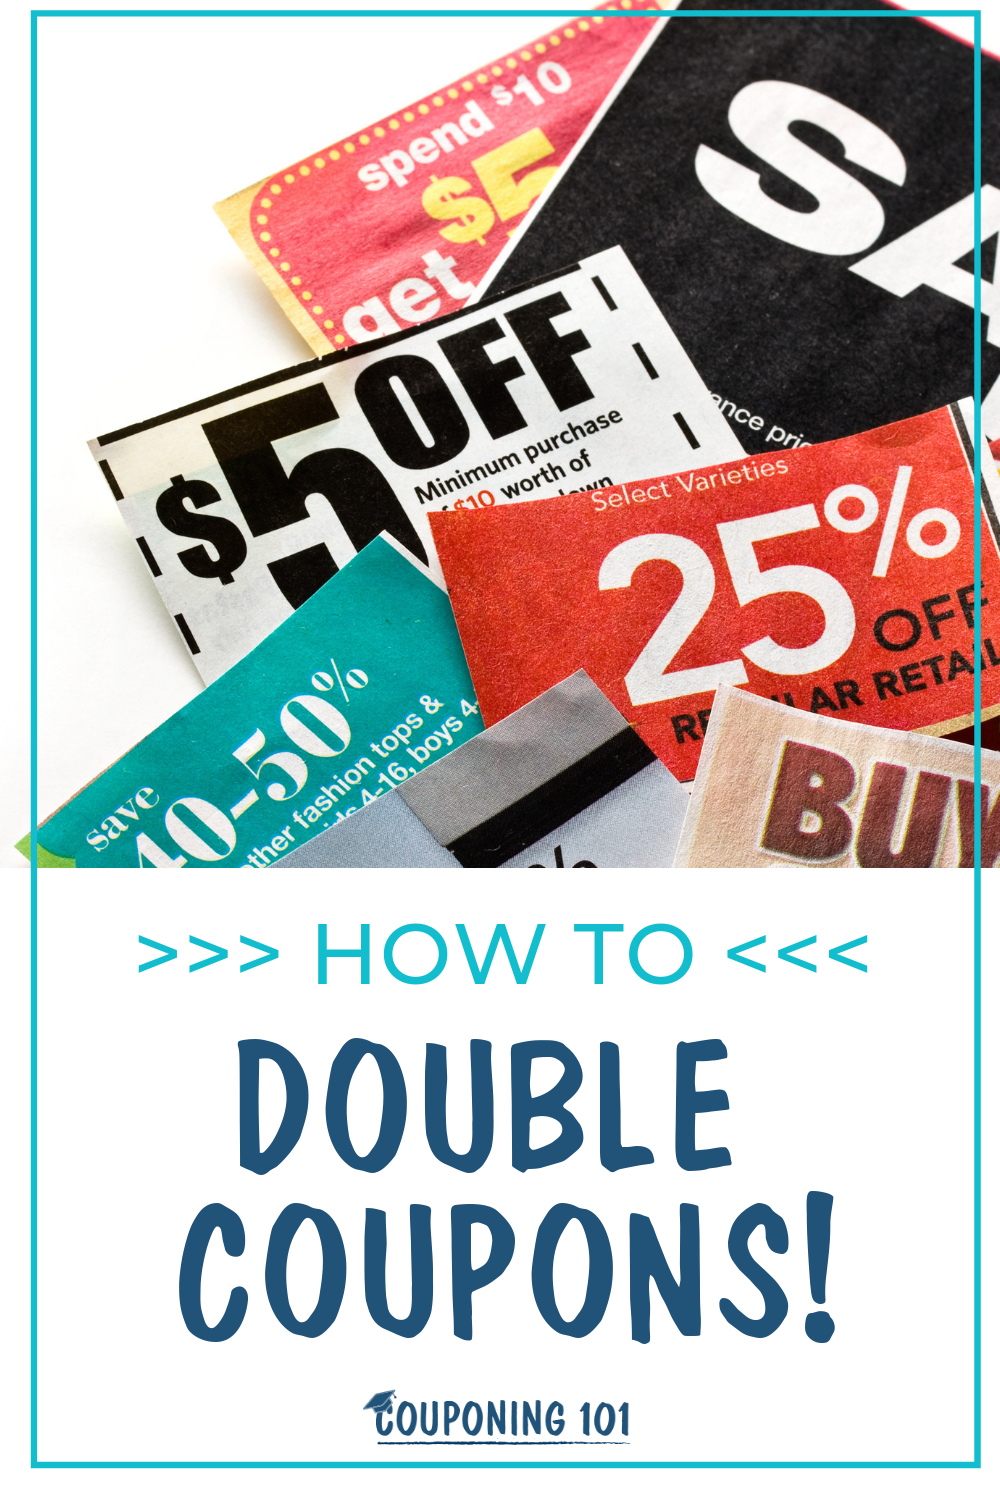 How To Double Coupons &amp;amp; What Does Doubling Coupons Mean - Free Printable Coupons For Panama City Beach Florida